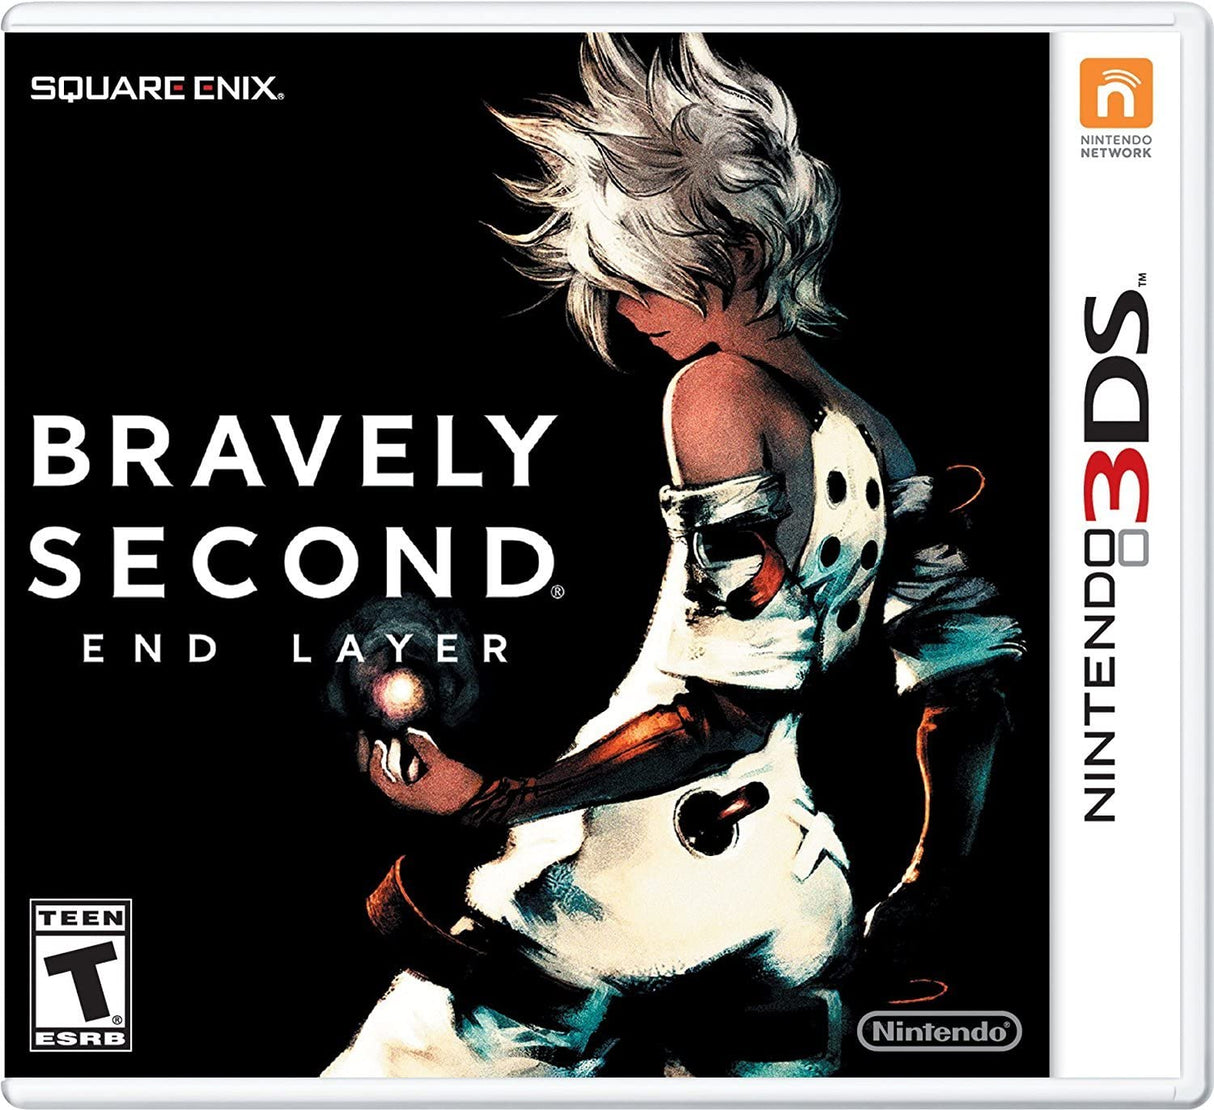 Bravely Second: End Layer - [Game Cartridge & Case] Nintendo 3DS